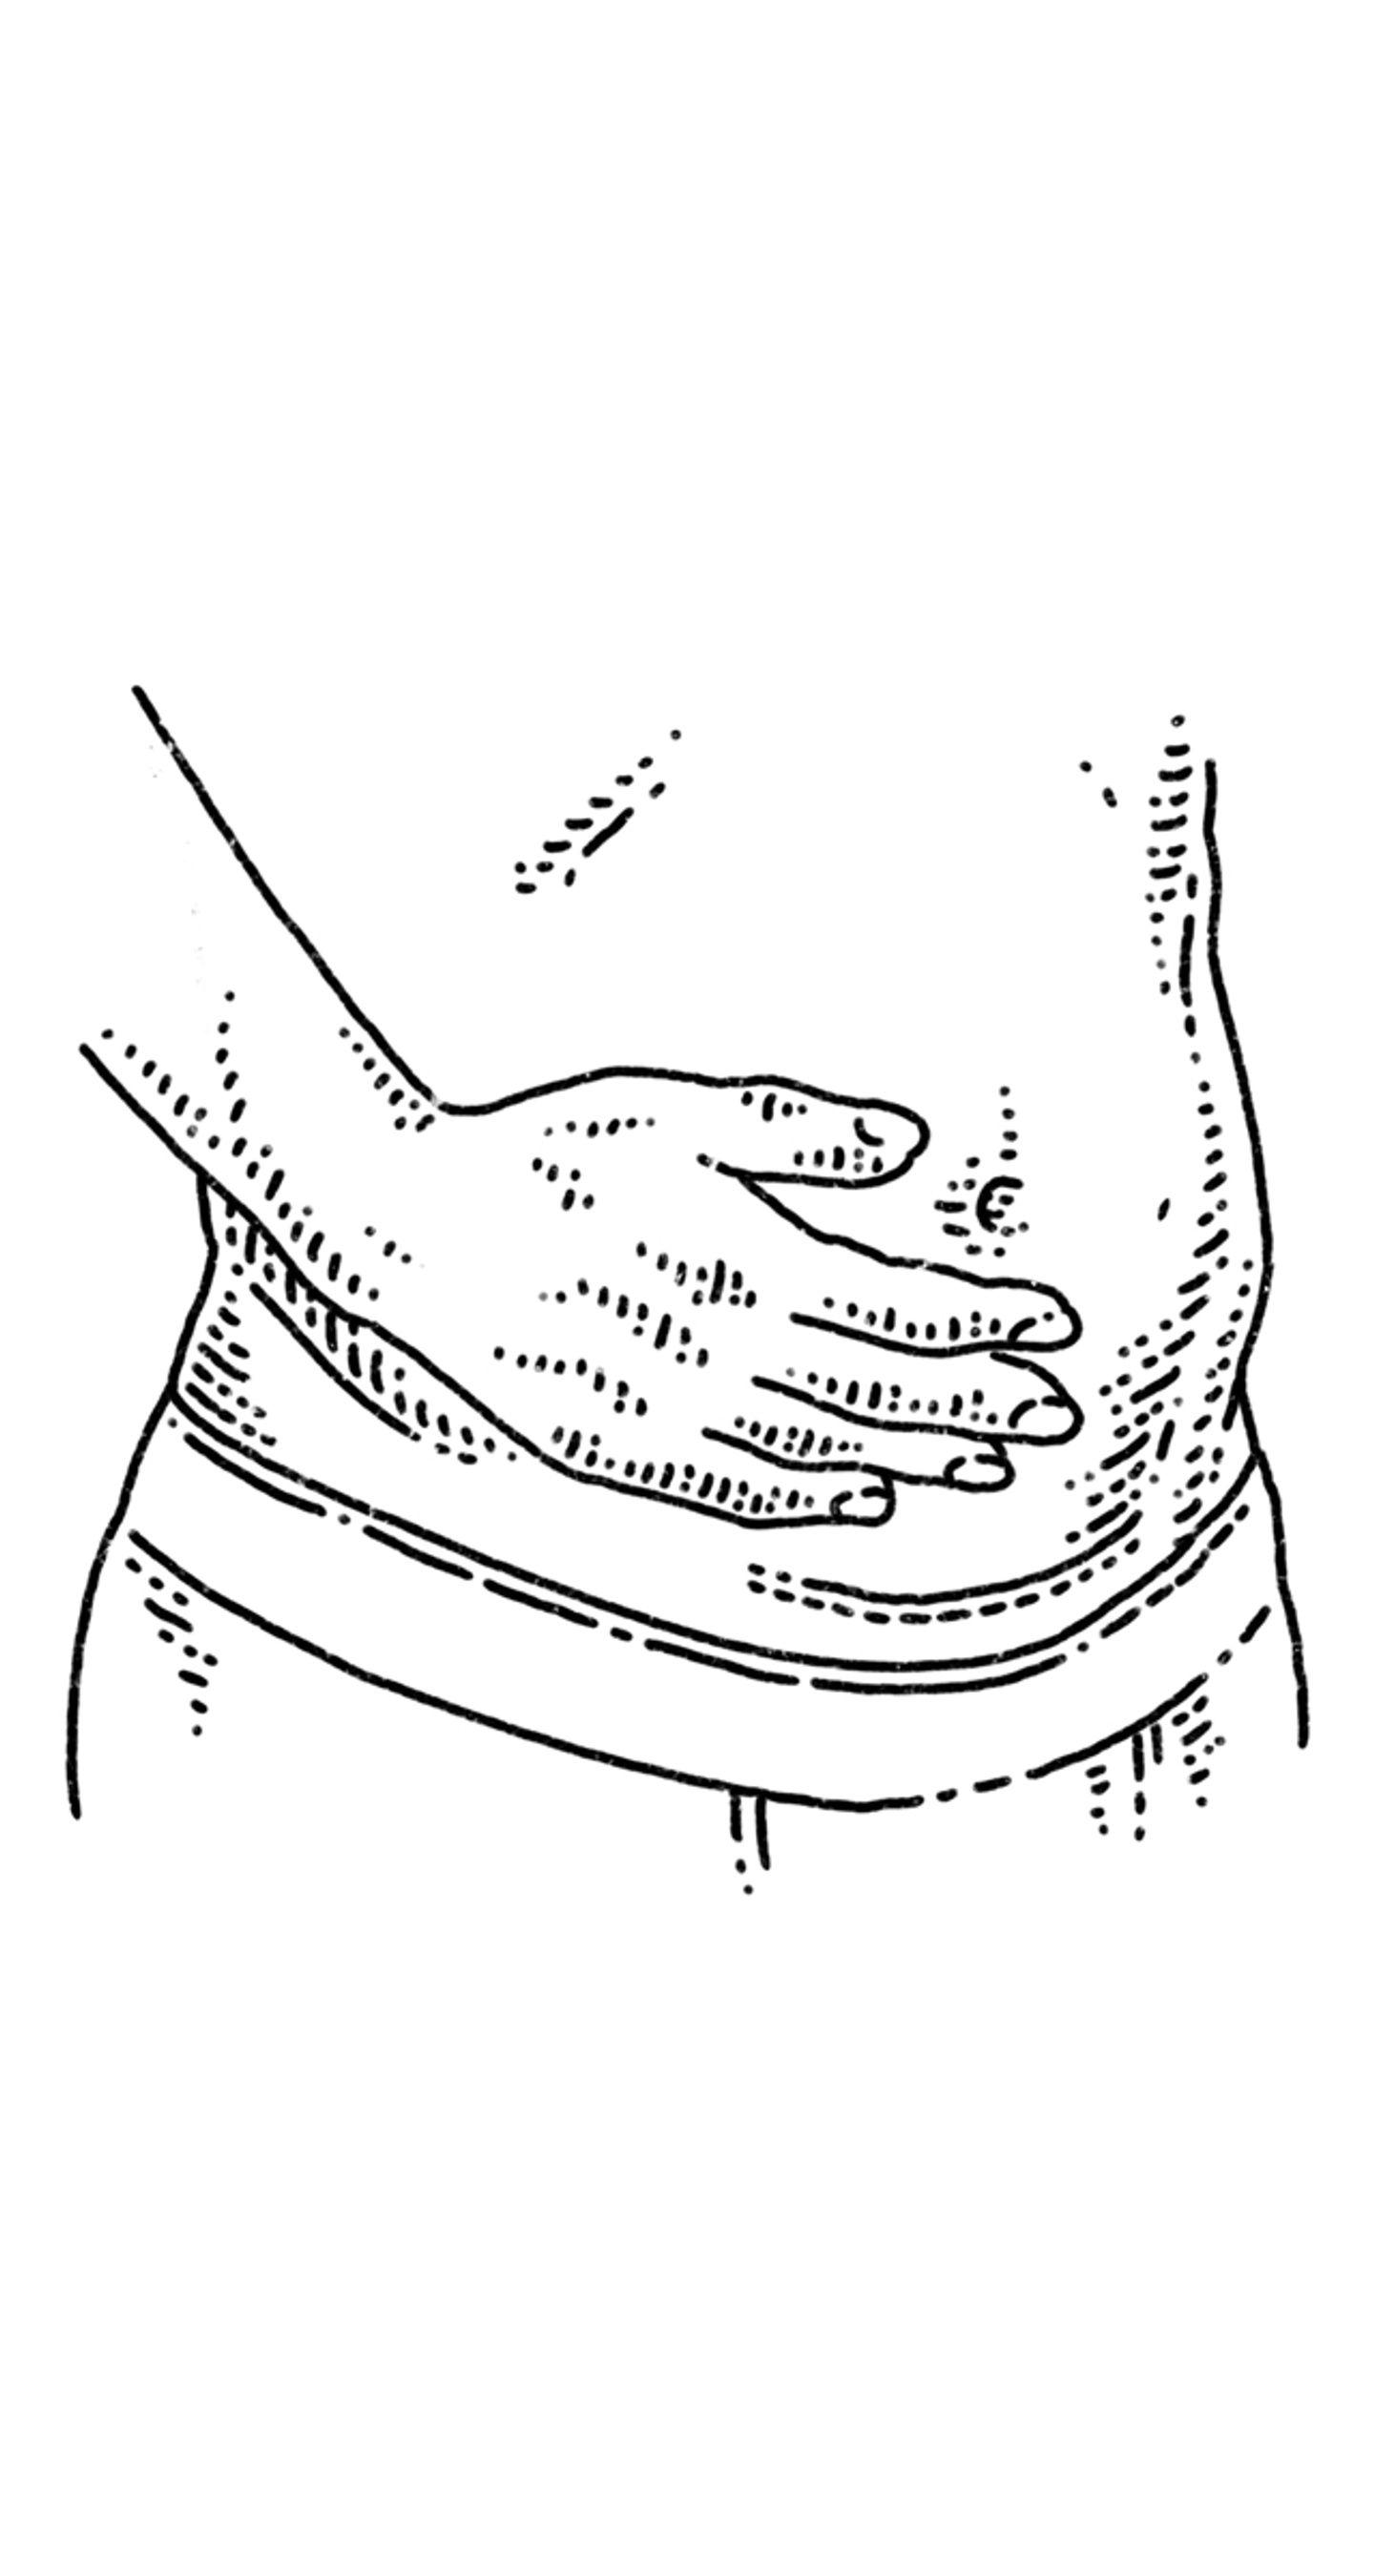 A hand placed over a lower abdomen with hysterectomy scar. 